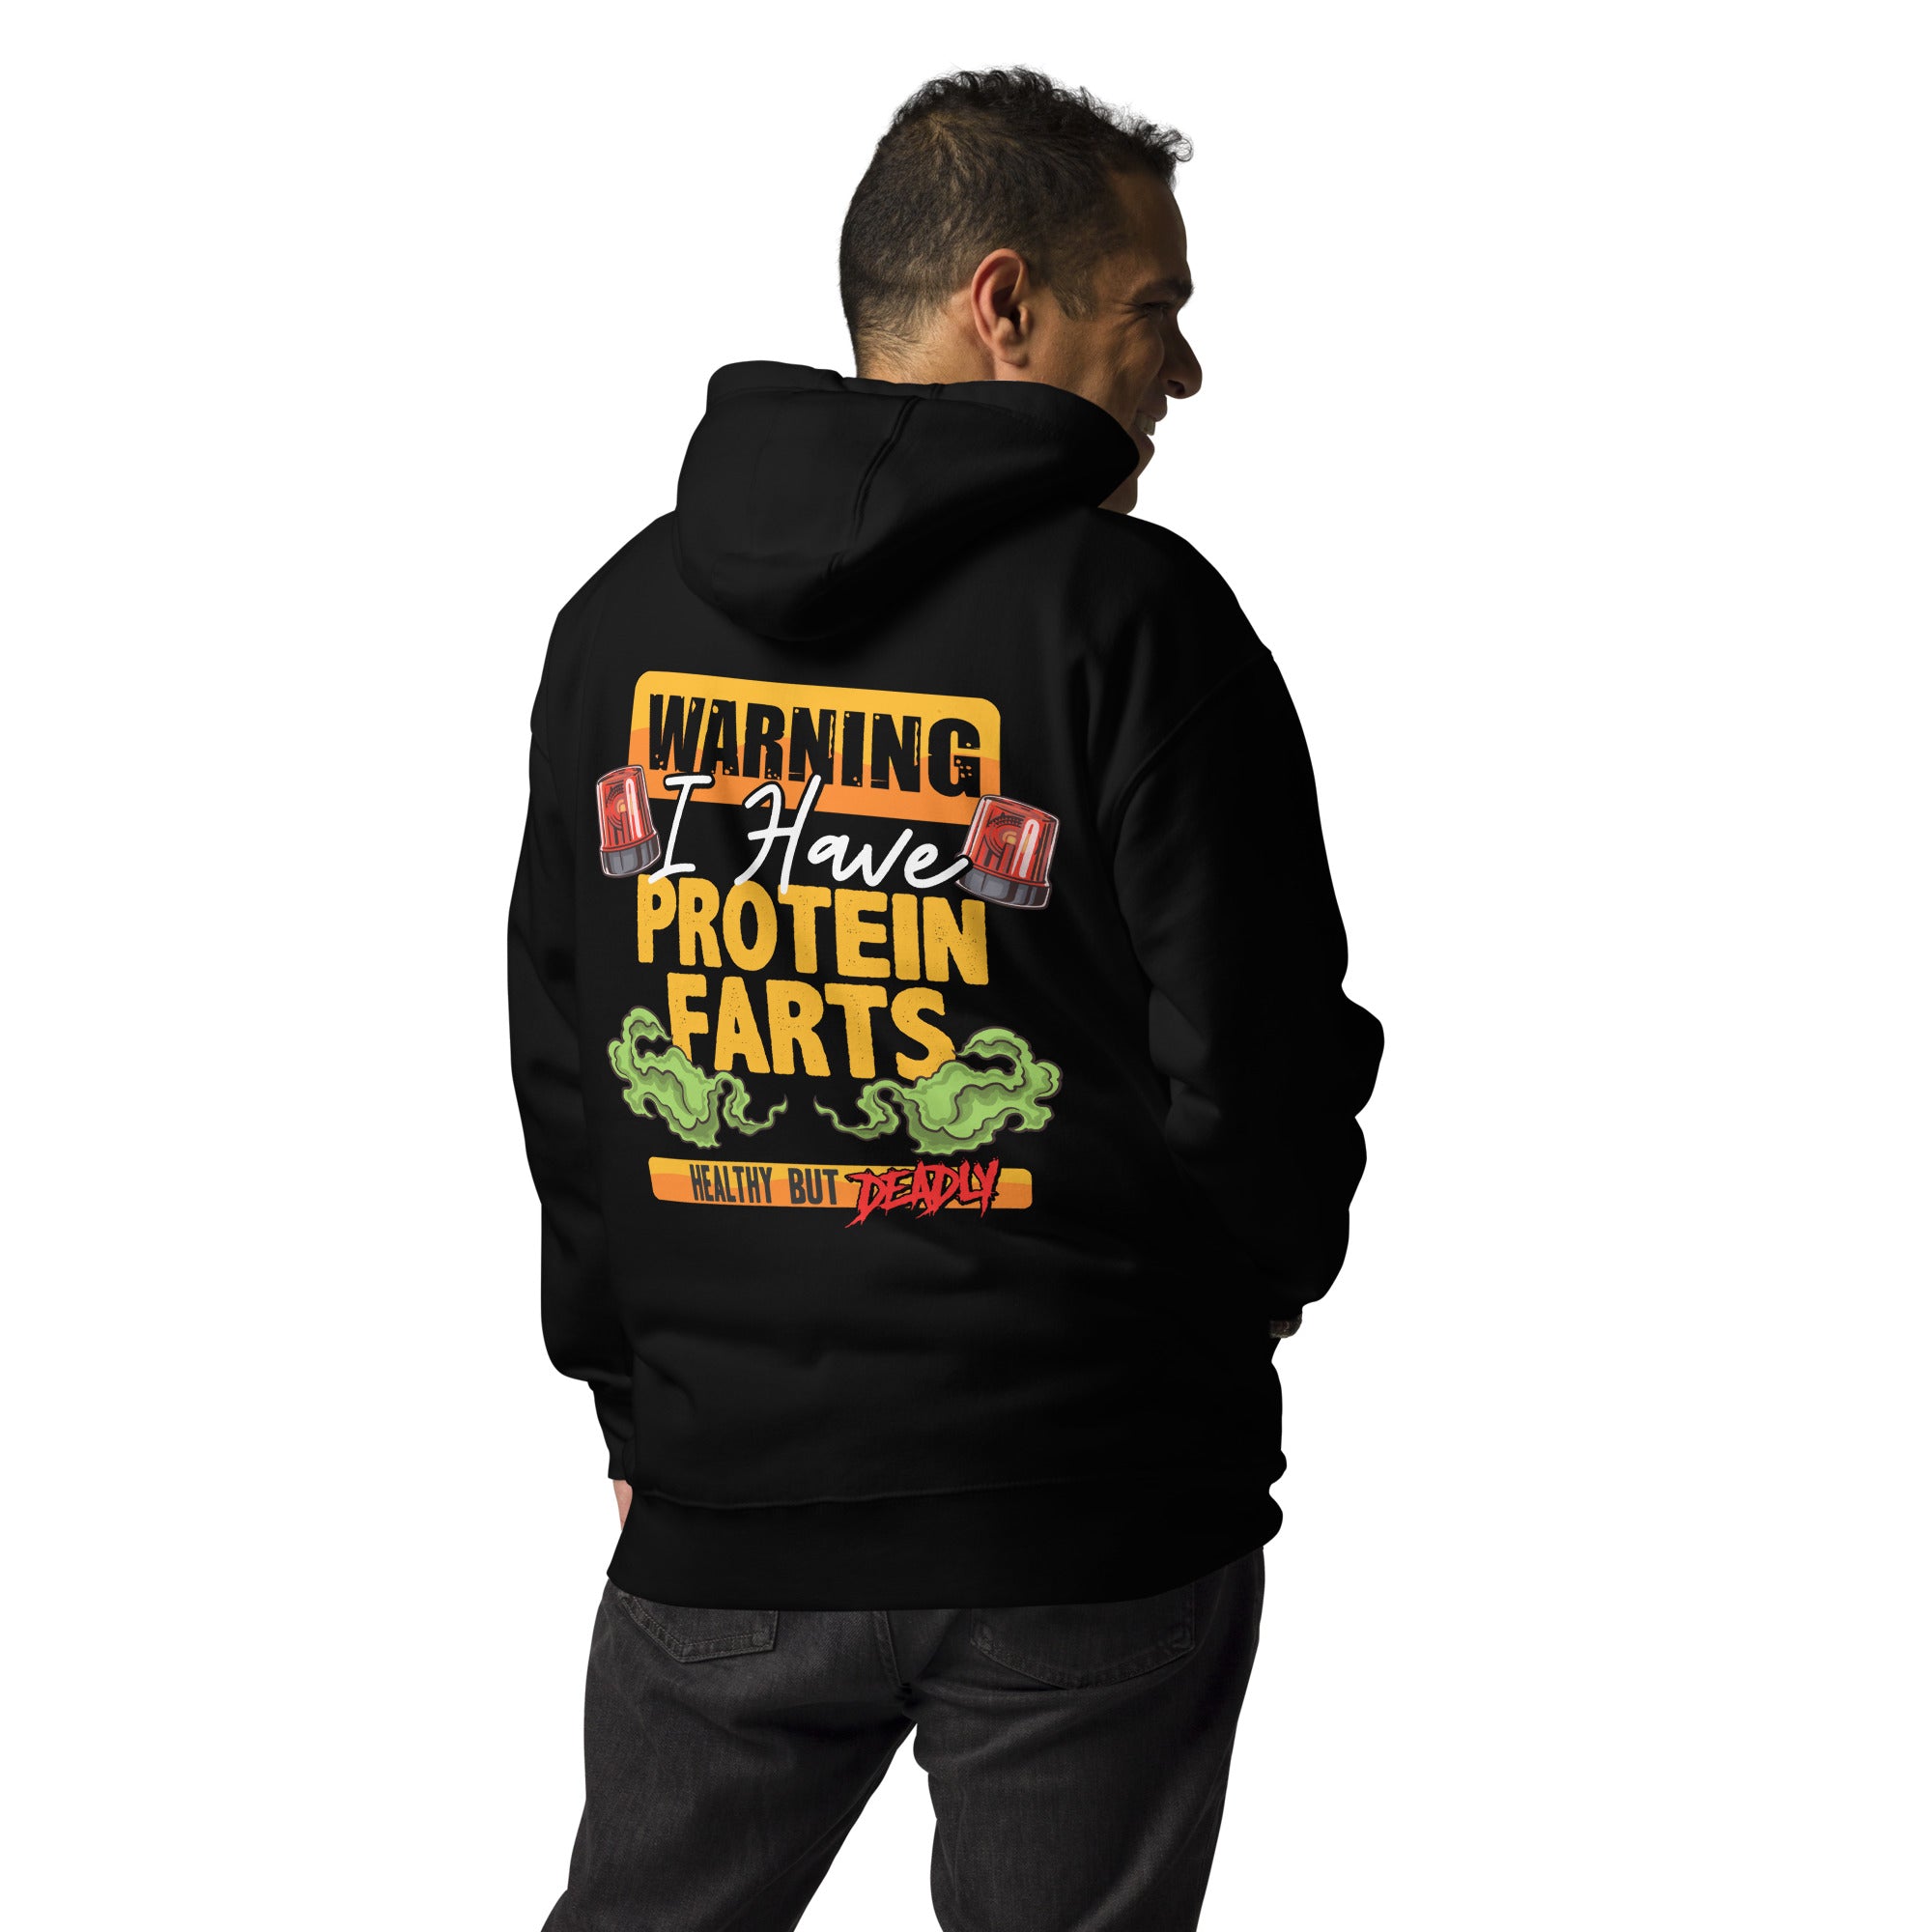 "Warning, I have Protein Farts, Healthy but Deadly" Unisex Hoodie